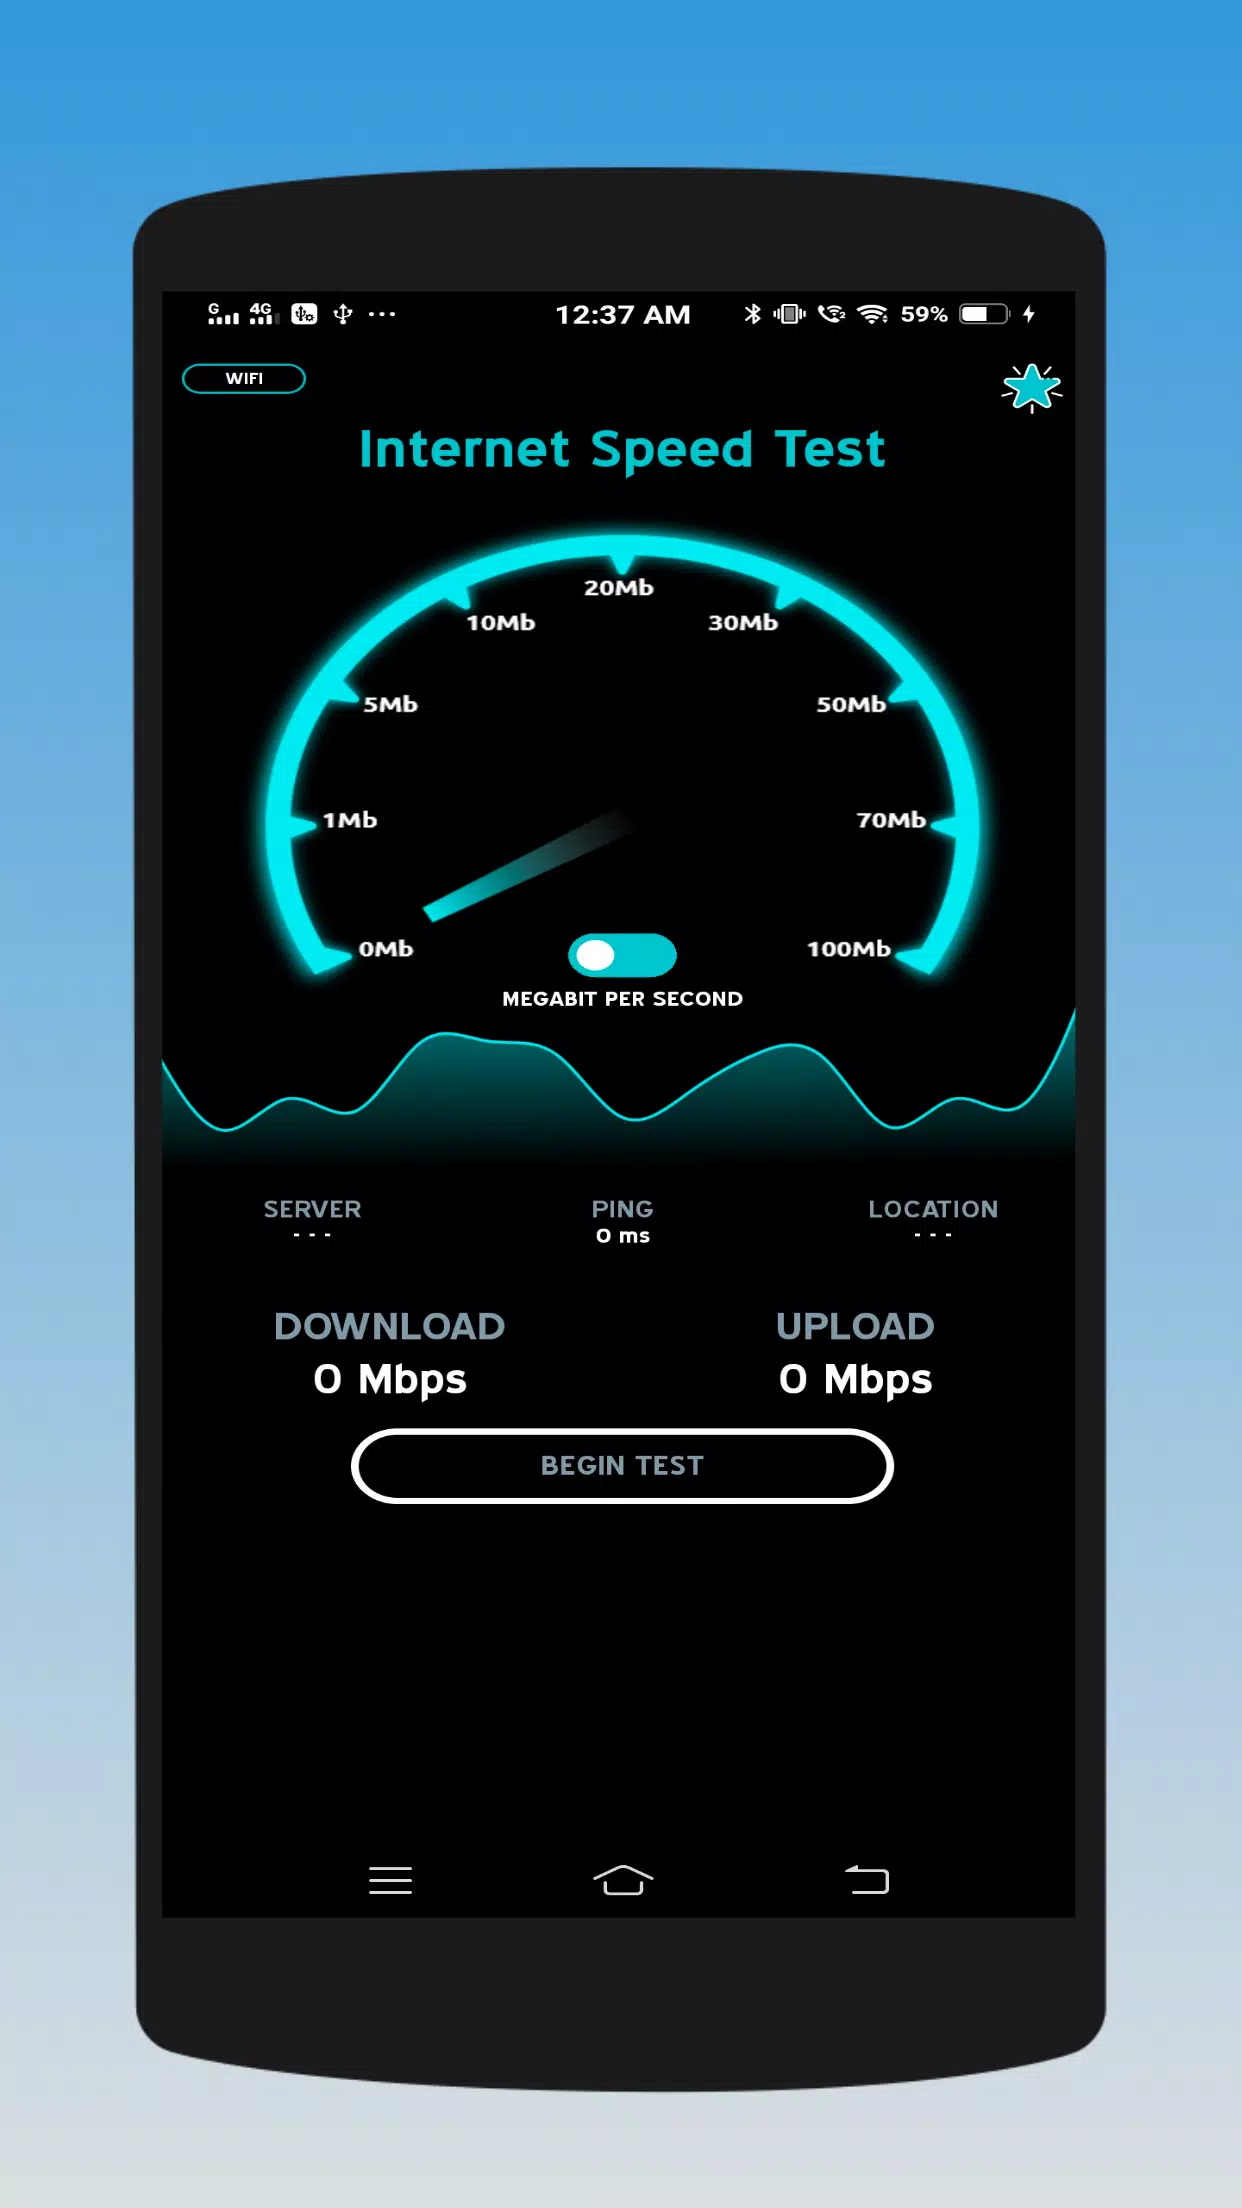 Internet Speed Meter Netspeed Network speed test for Android   APK ...